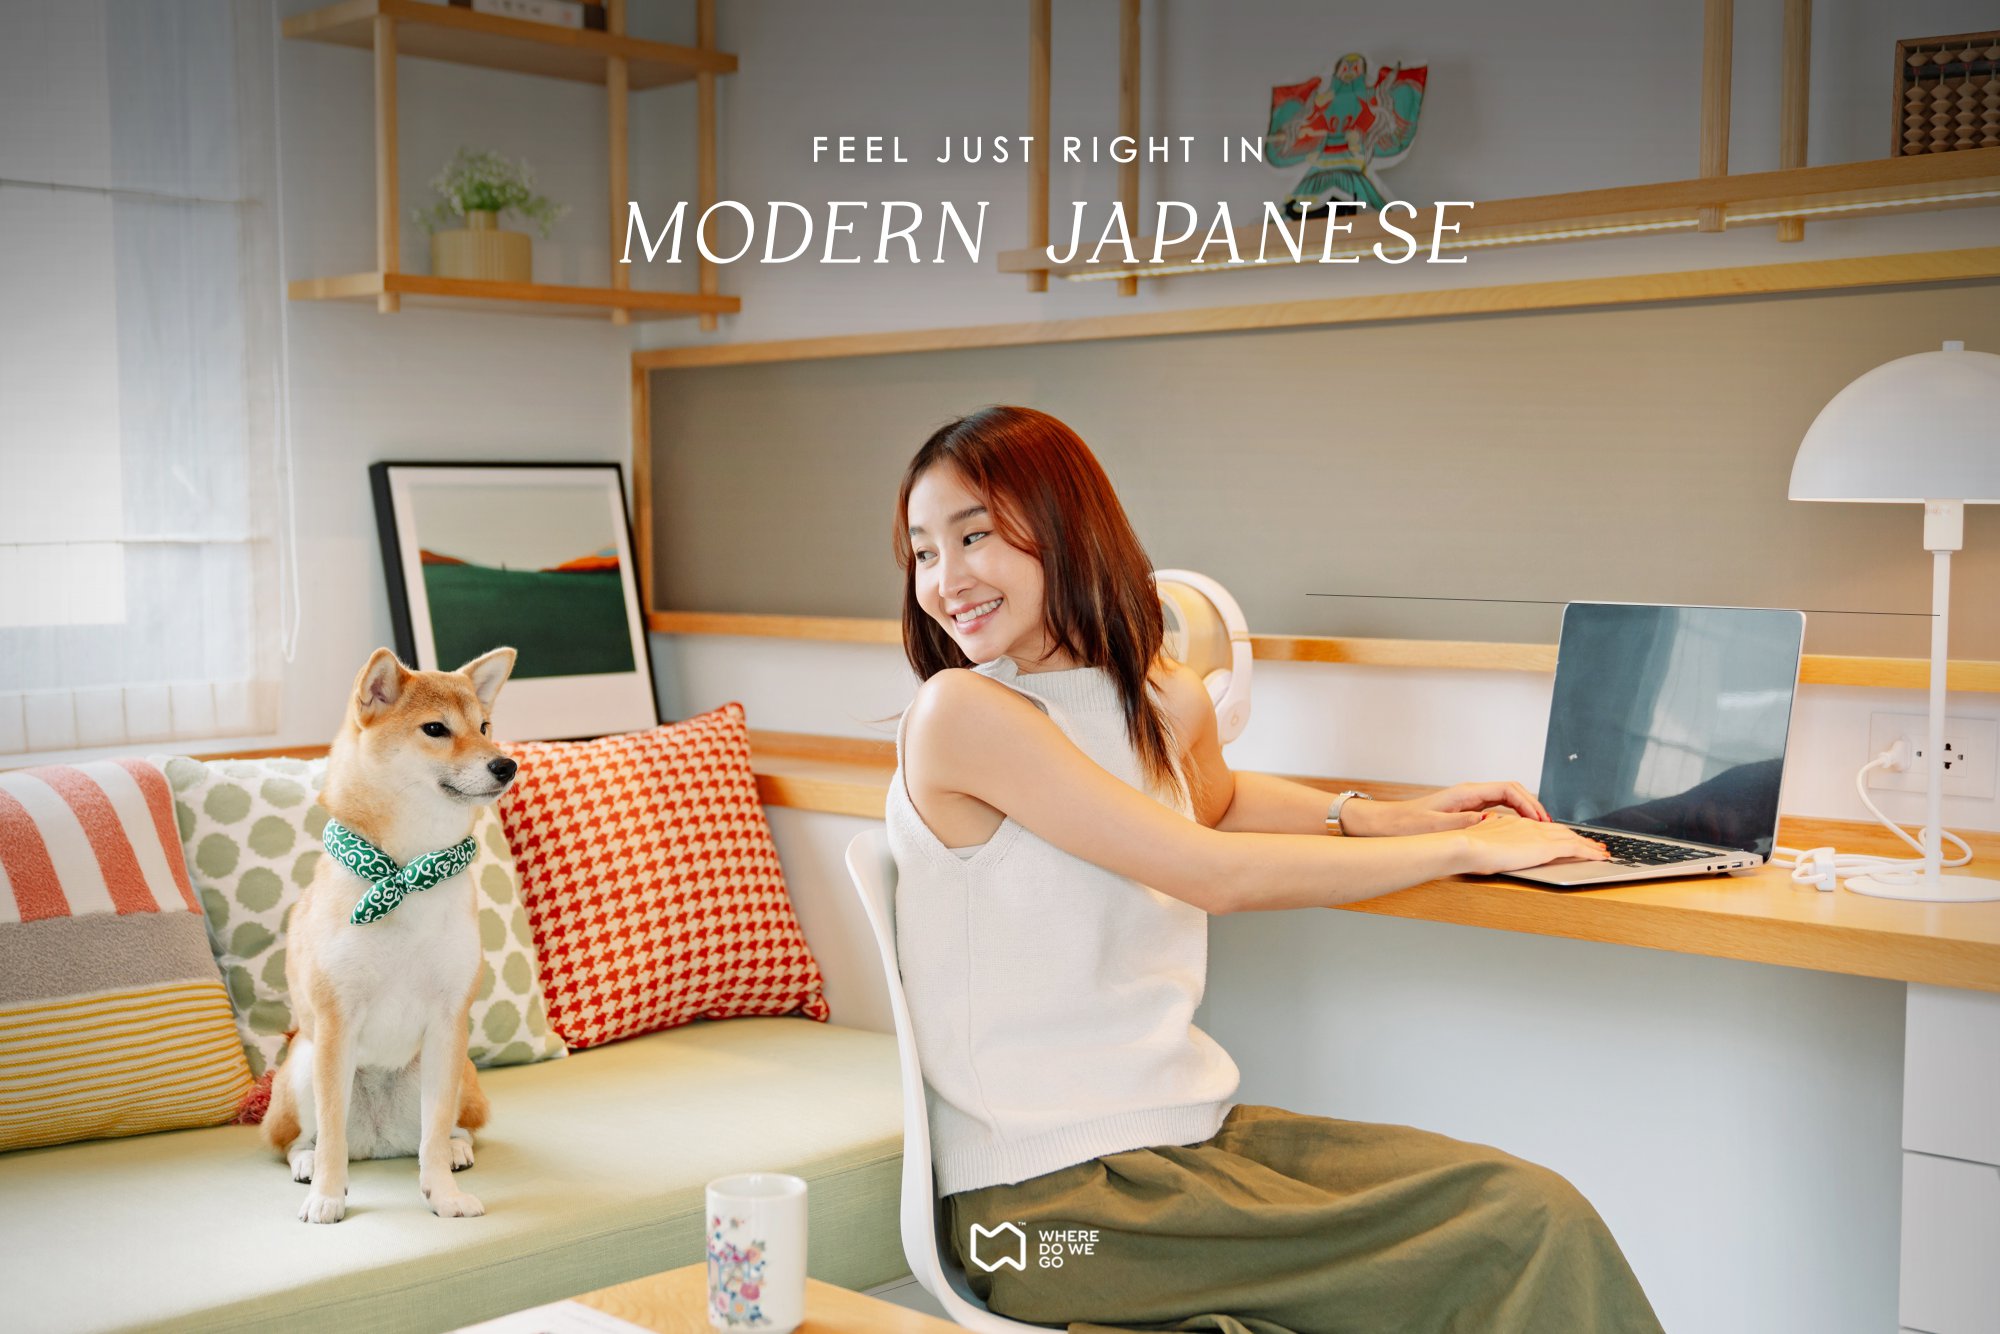 Feel just right in modern Japanese.